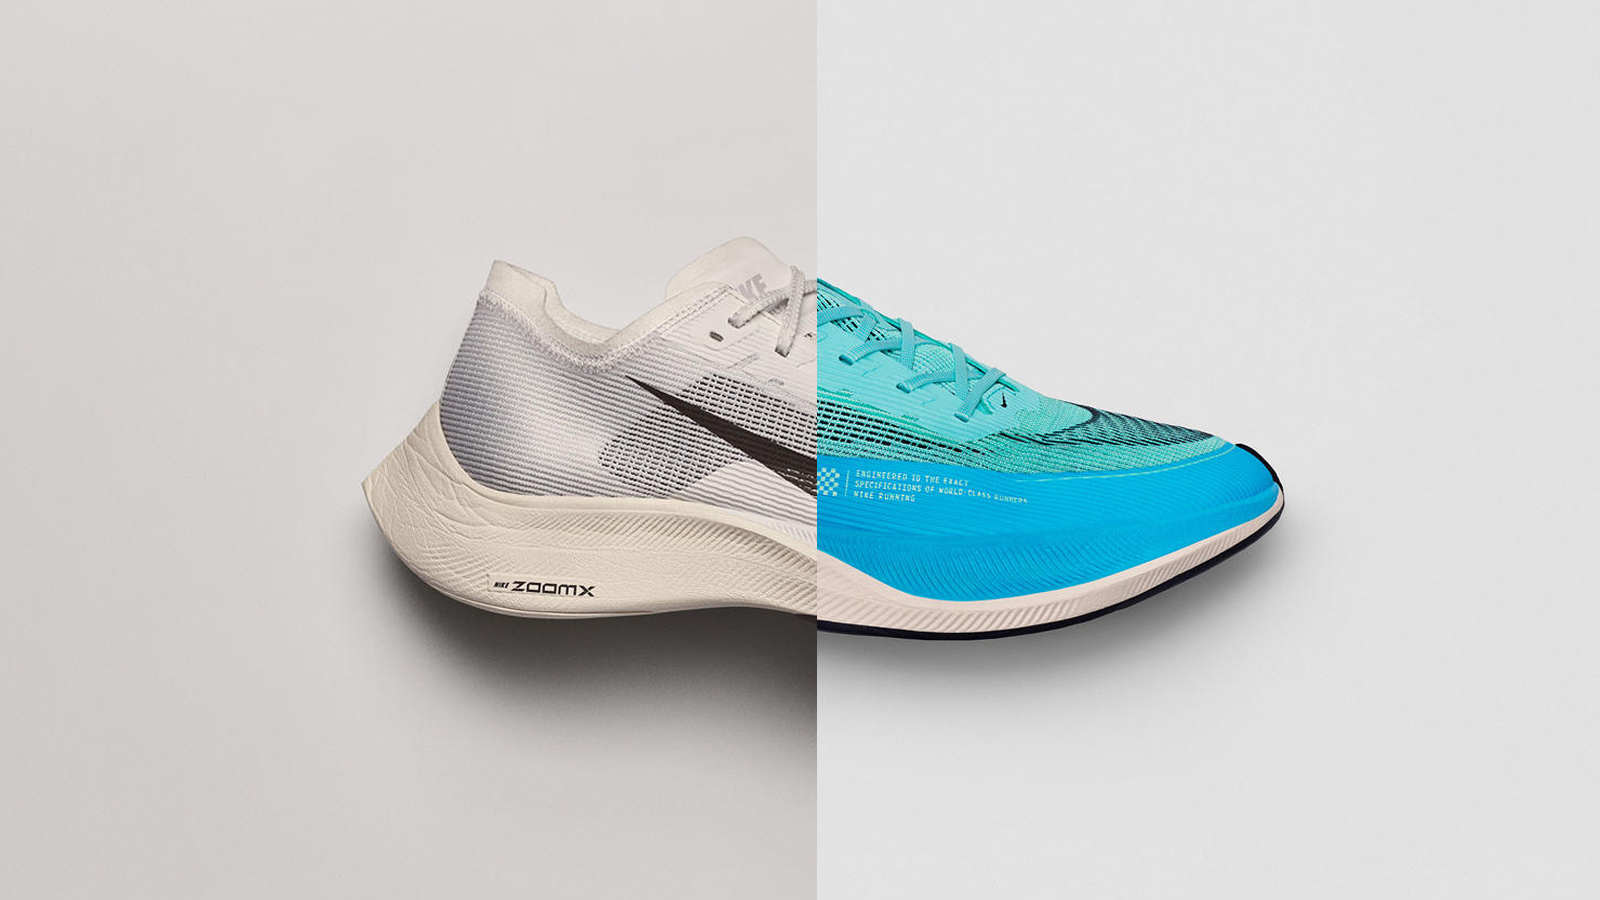 Nike ZoomX Vaporfly NEXT% 2: the successor of Nike's most